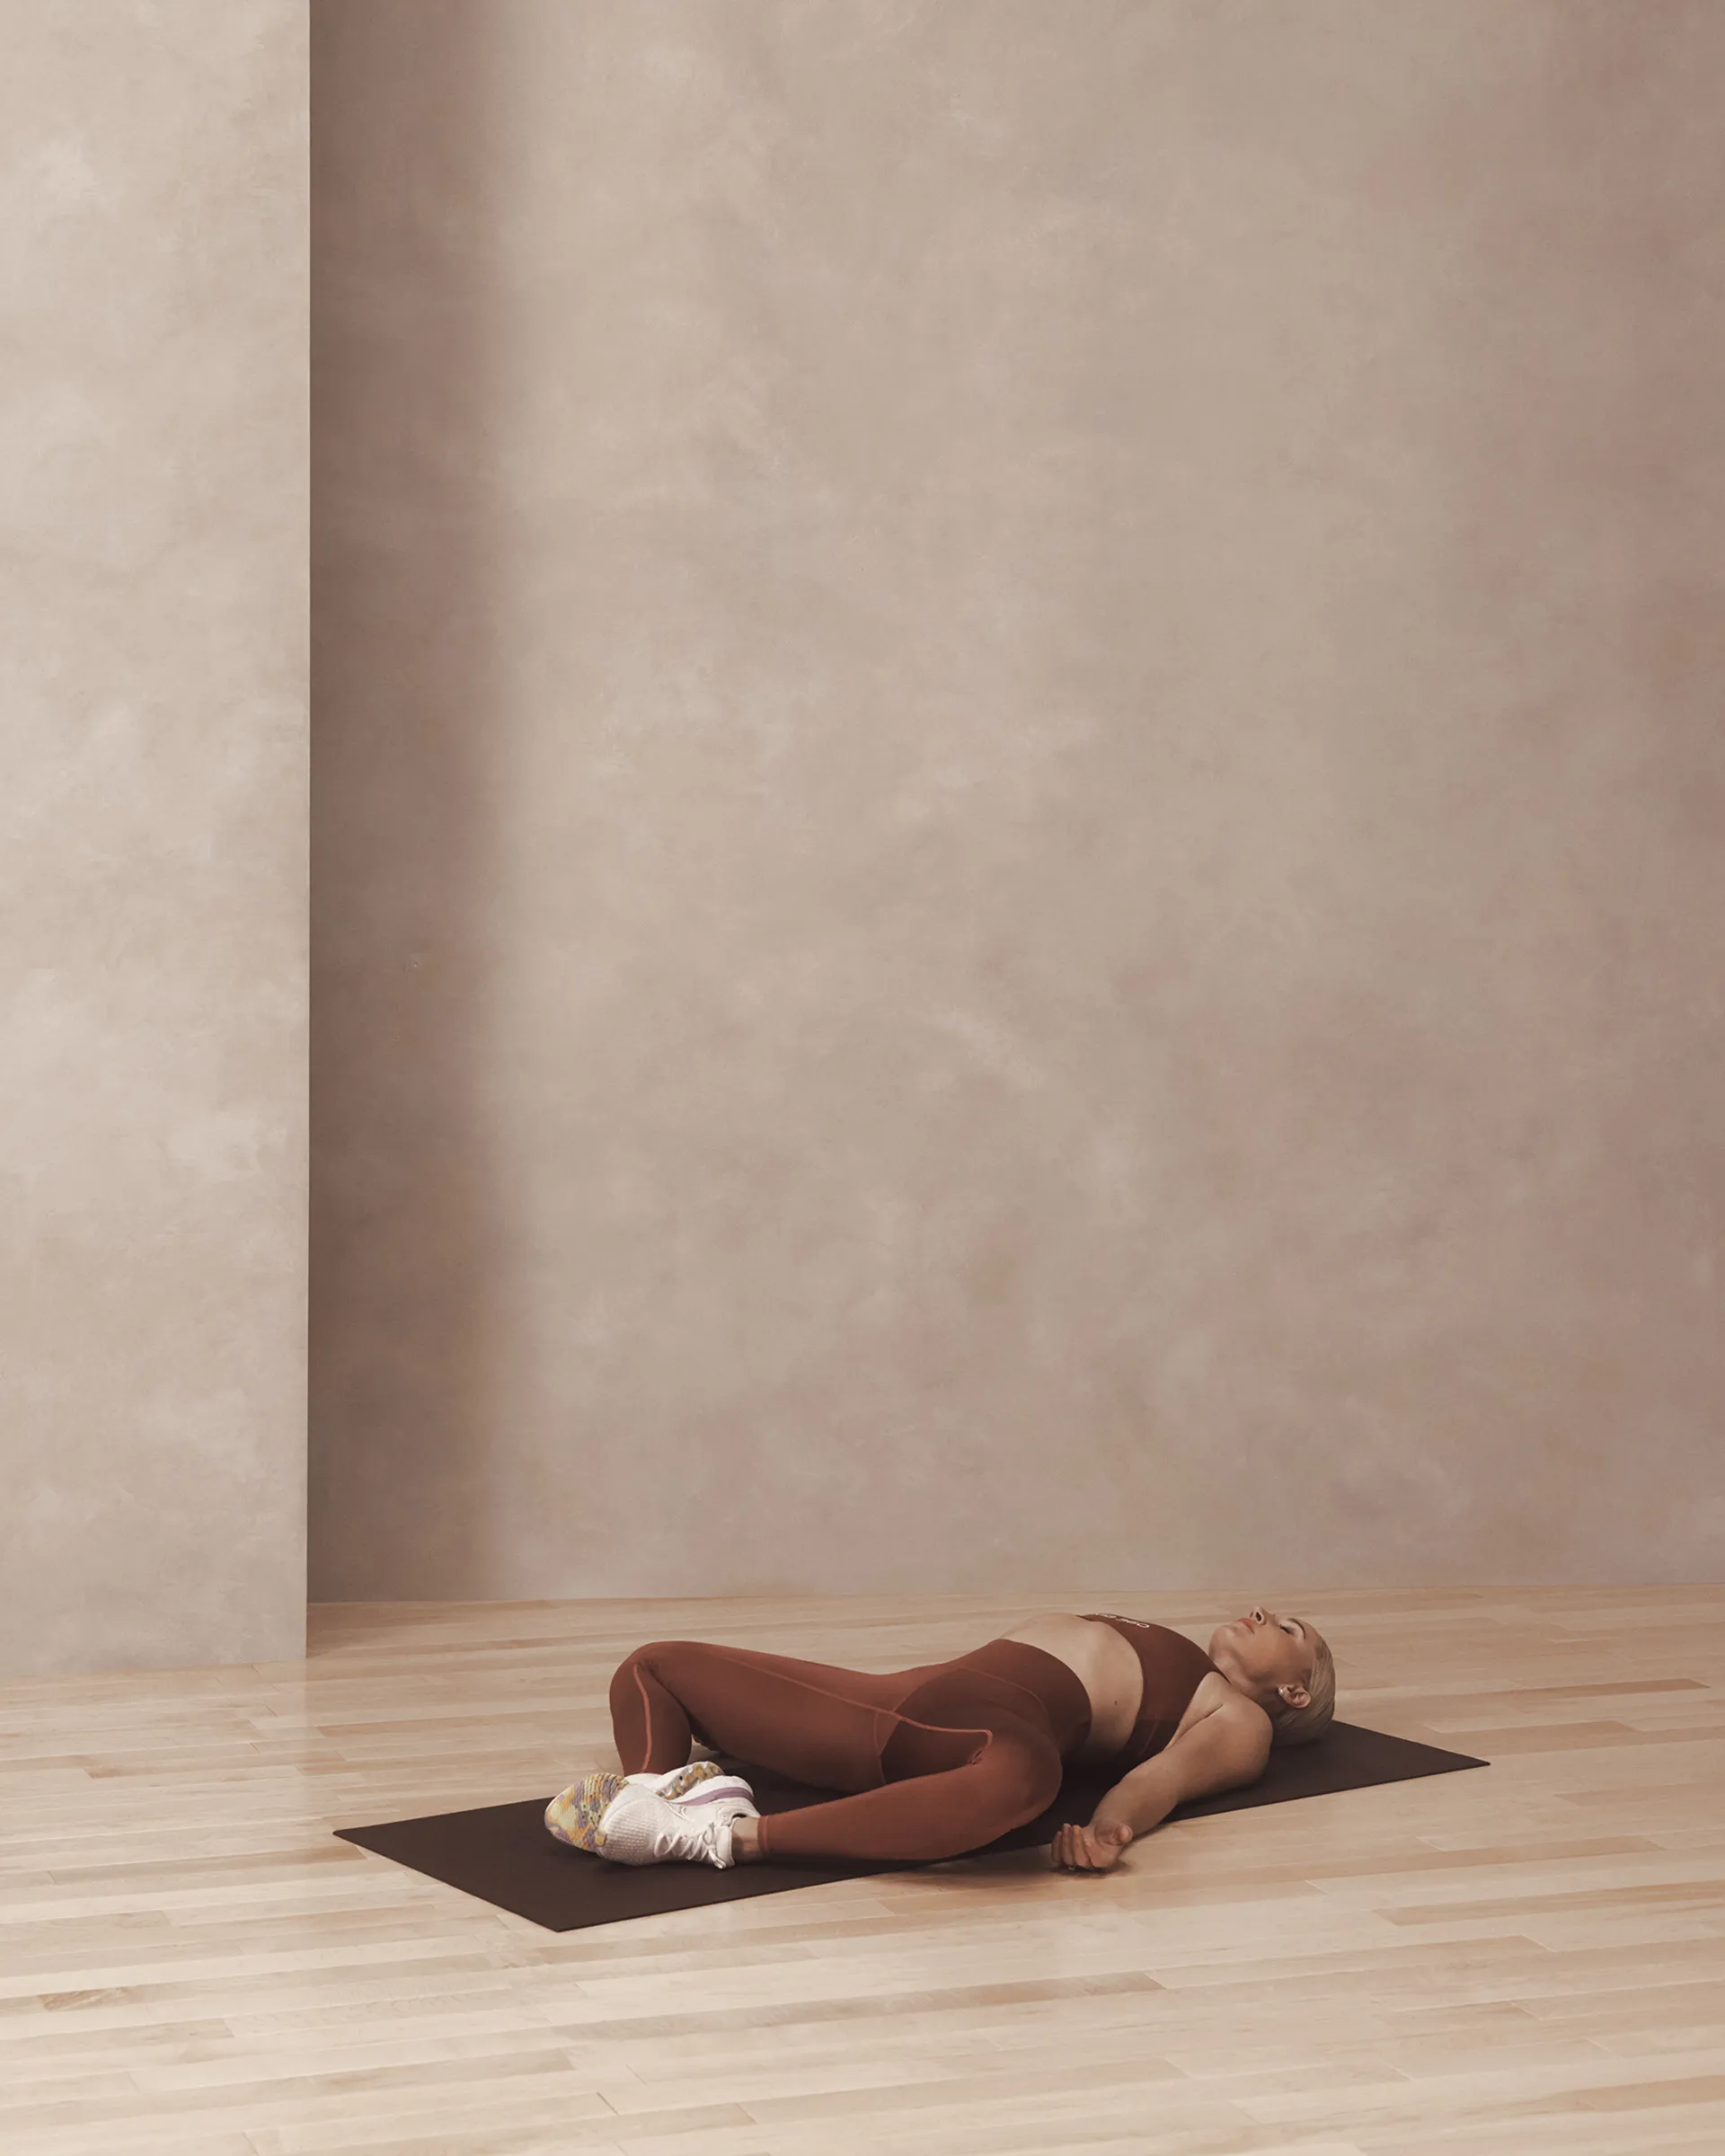 A Life Time member in a supine butterfly pose on a yoga mat.